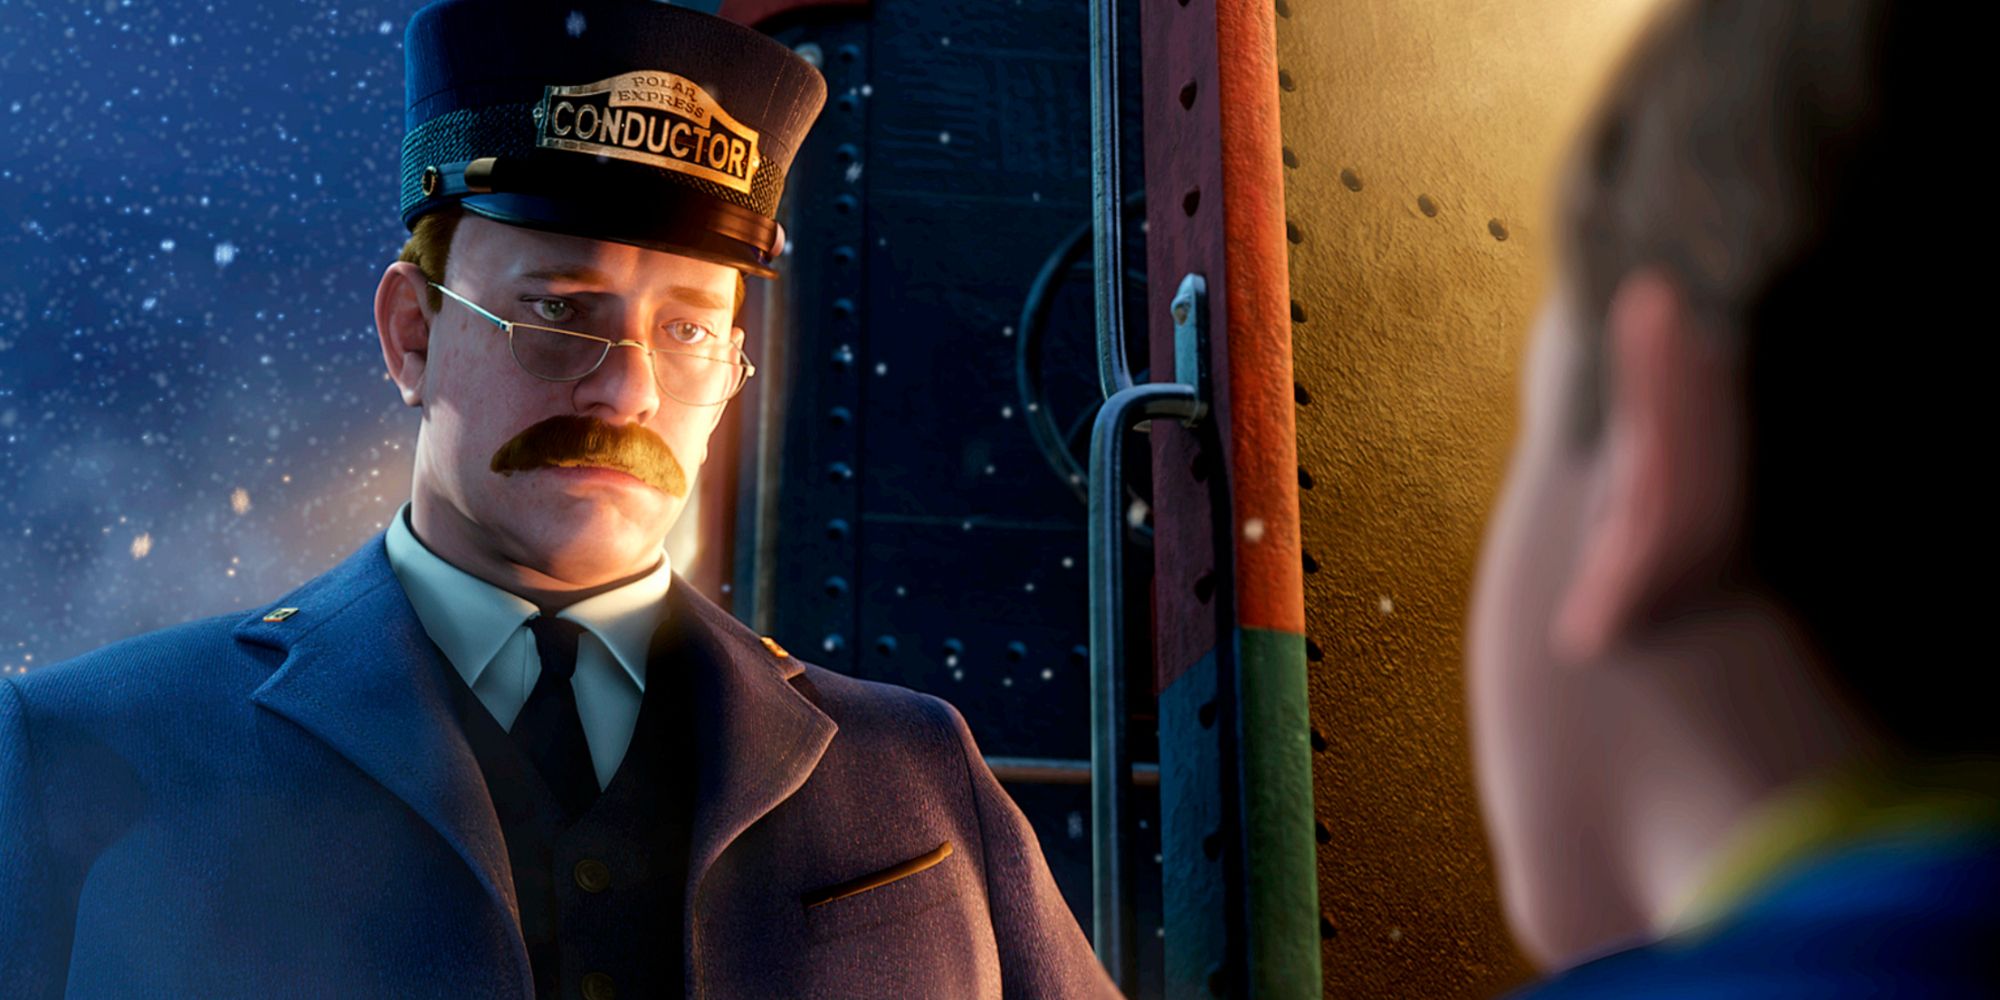 Train conductor looking sternly at little boy in The Polar Express.